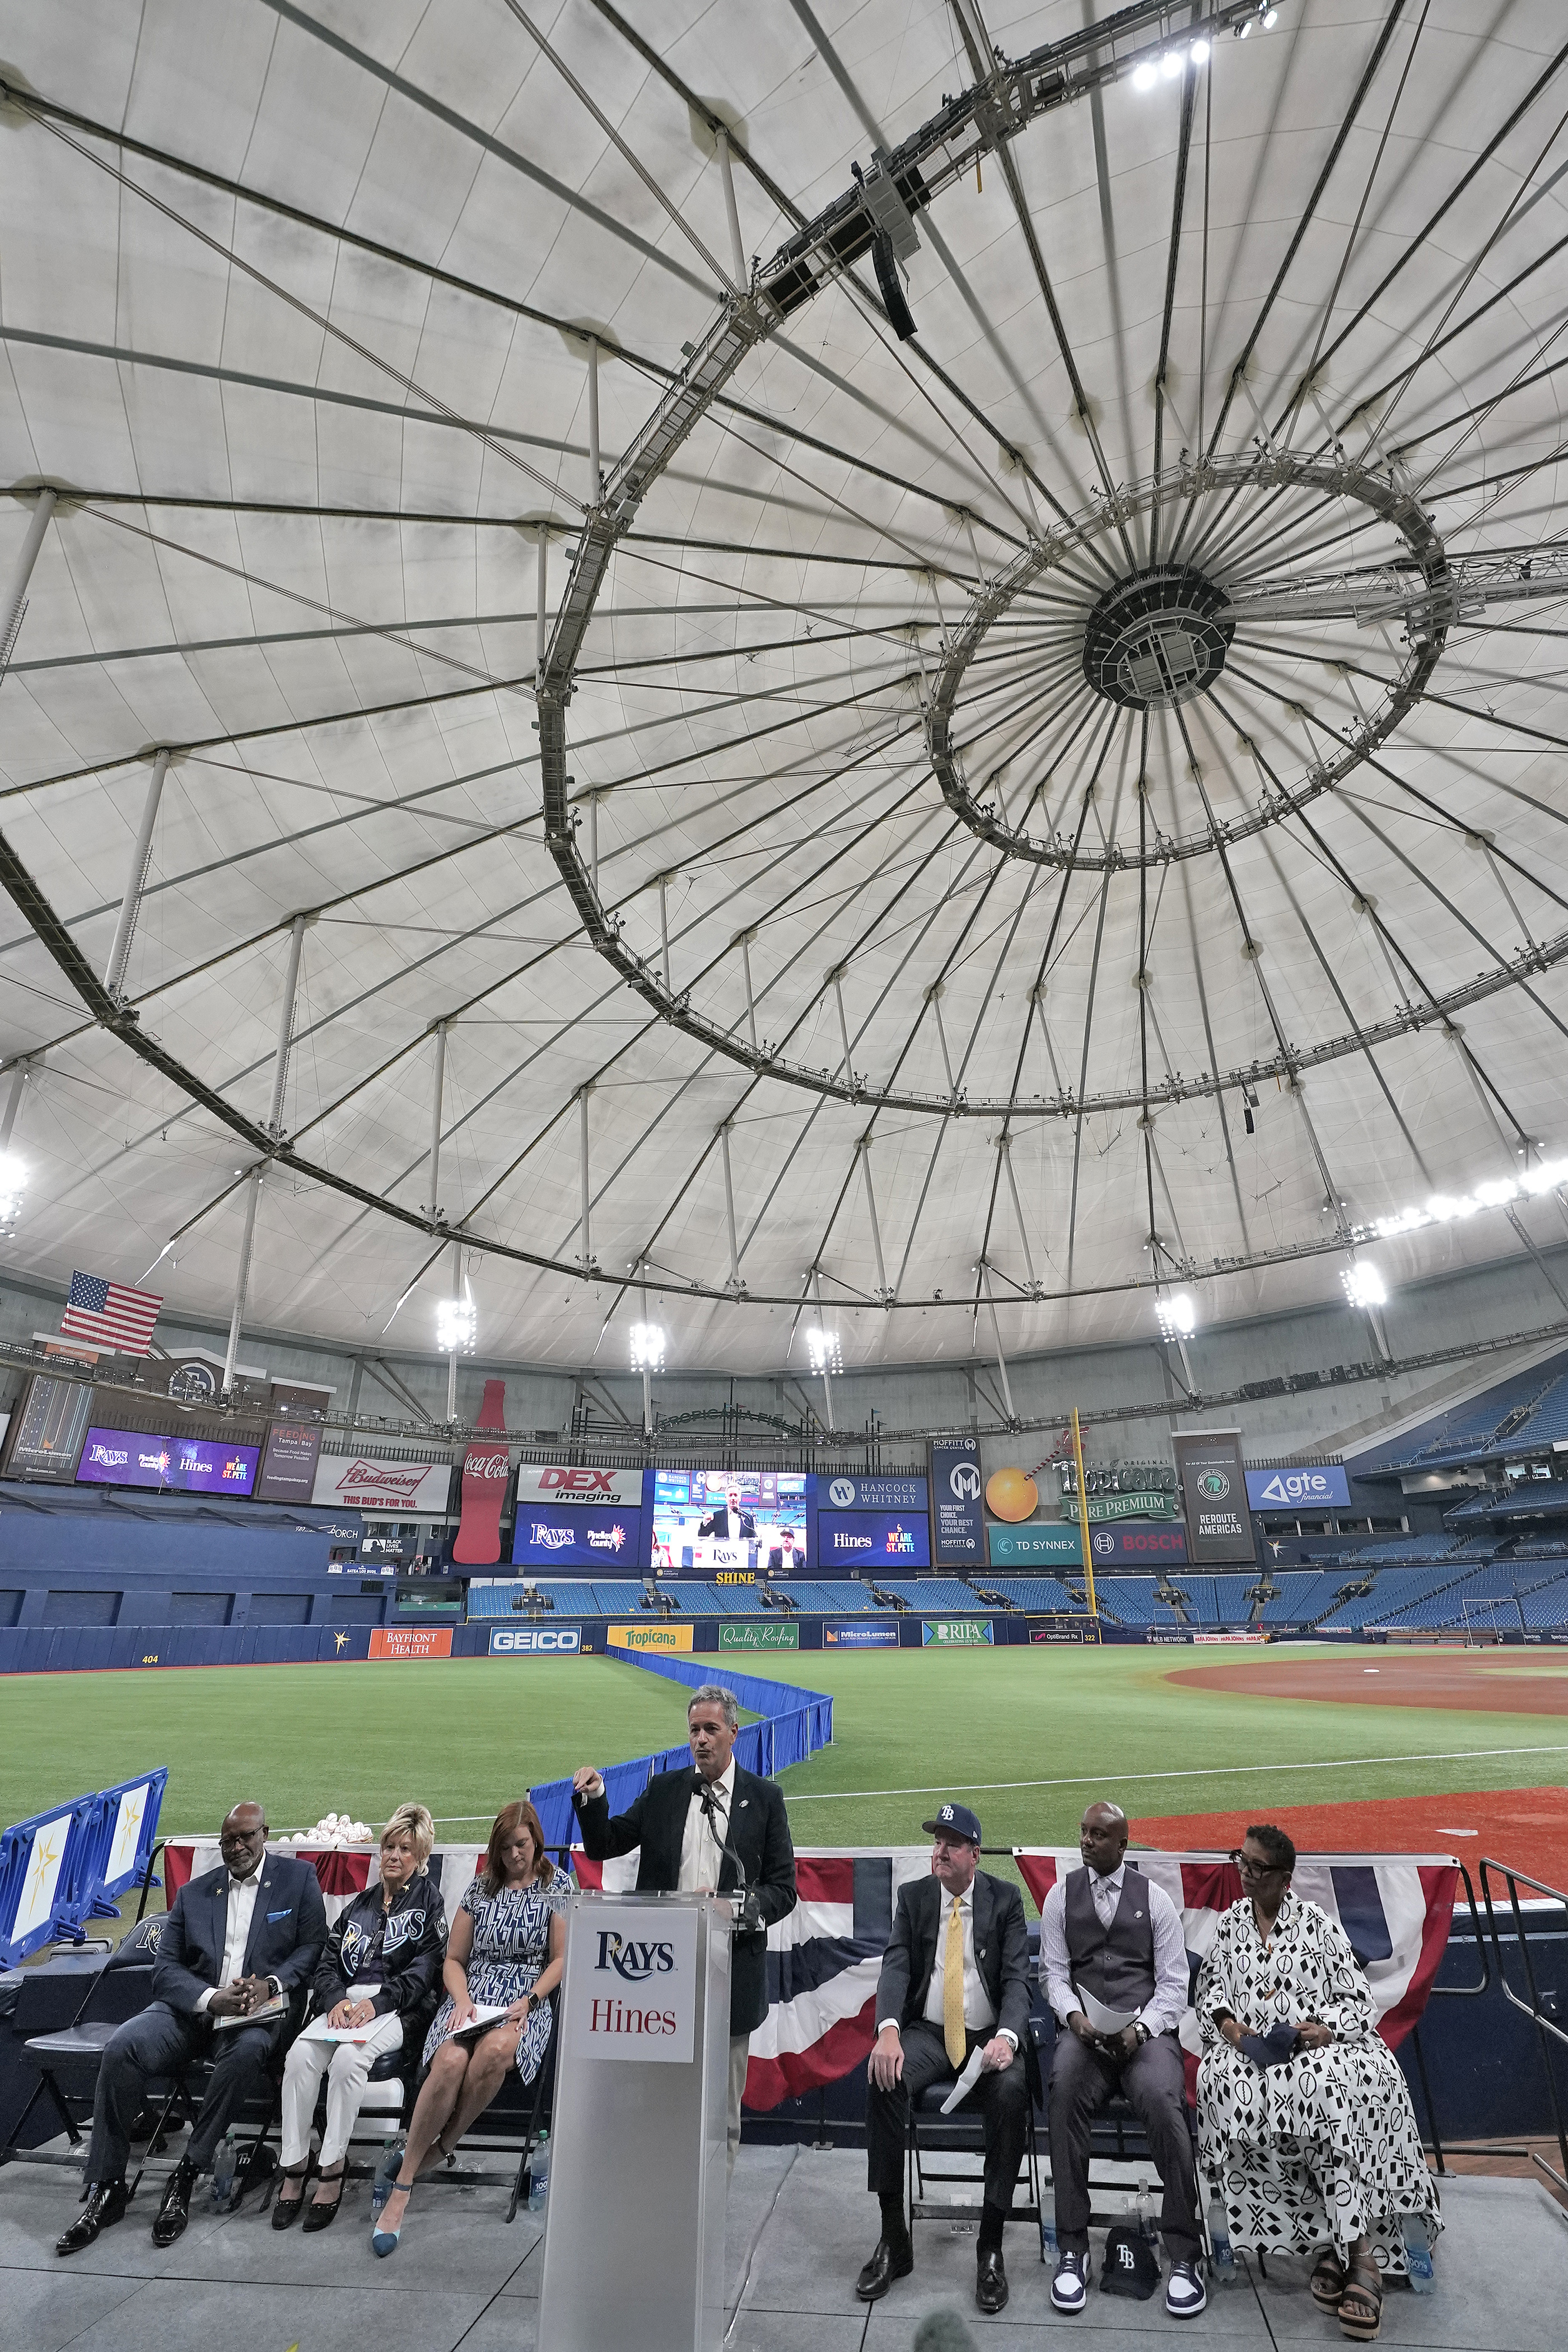 The Tampa Bay Rays Get A New Stadium Deal In St. Petersburg